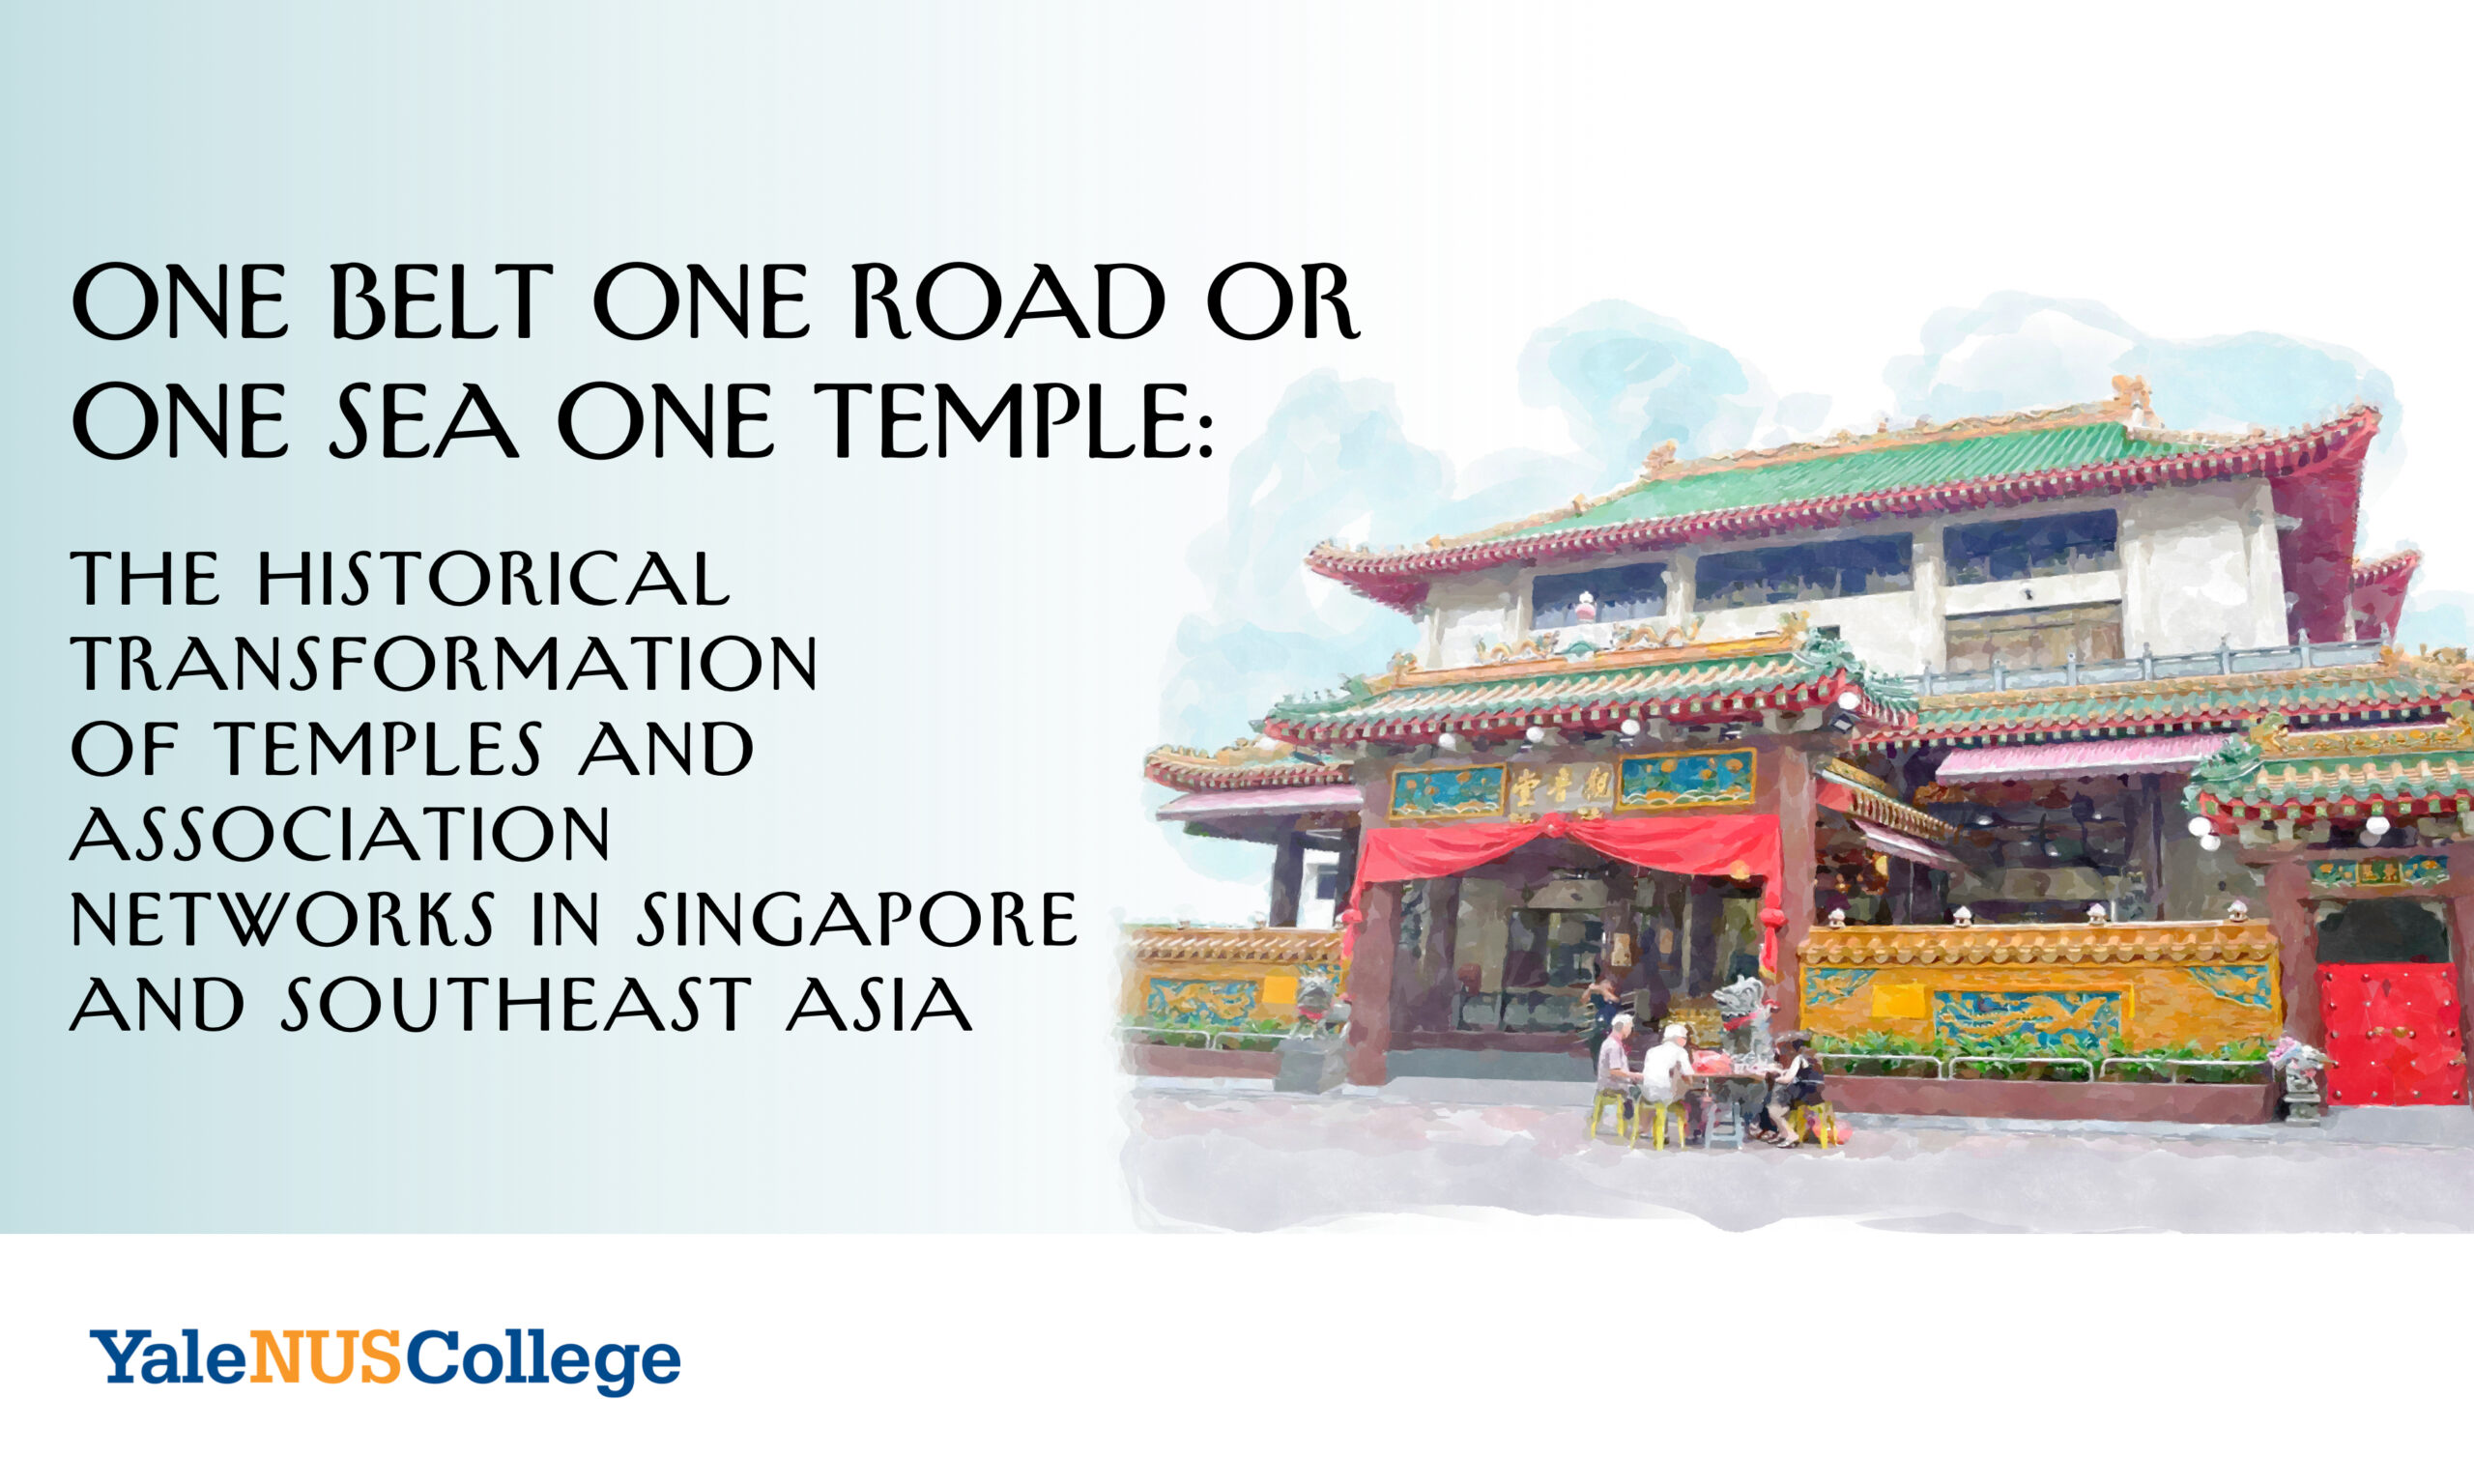 One Belt One Road or One Sea One Temple The Historical Transformation of Temples and Association Networks in Singapore and Southeast Asia image